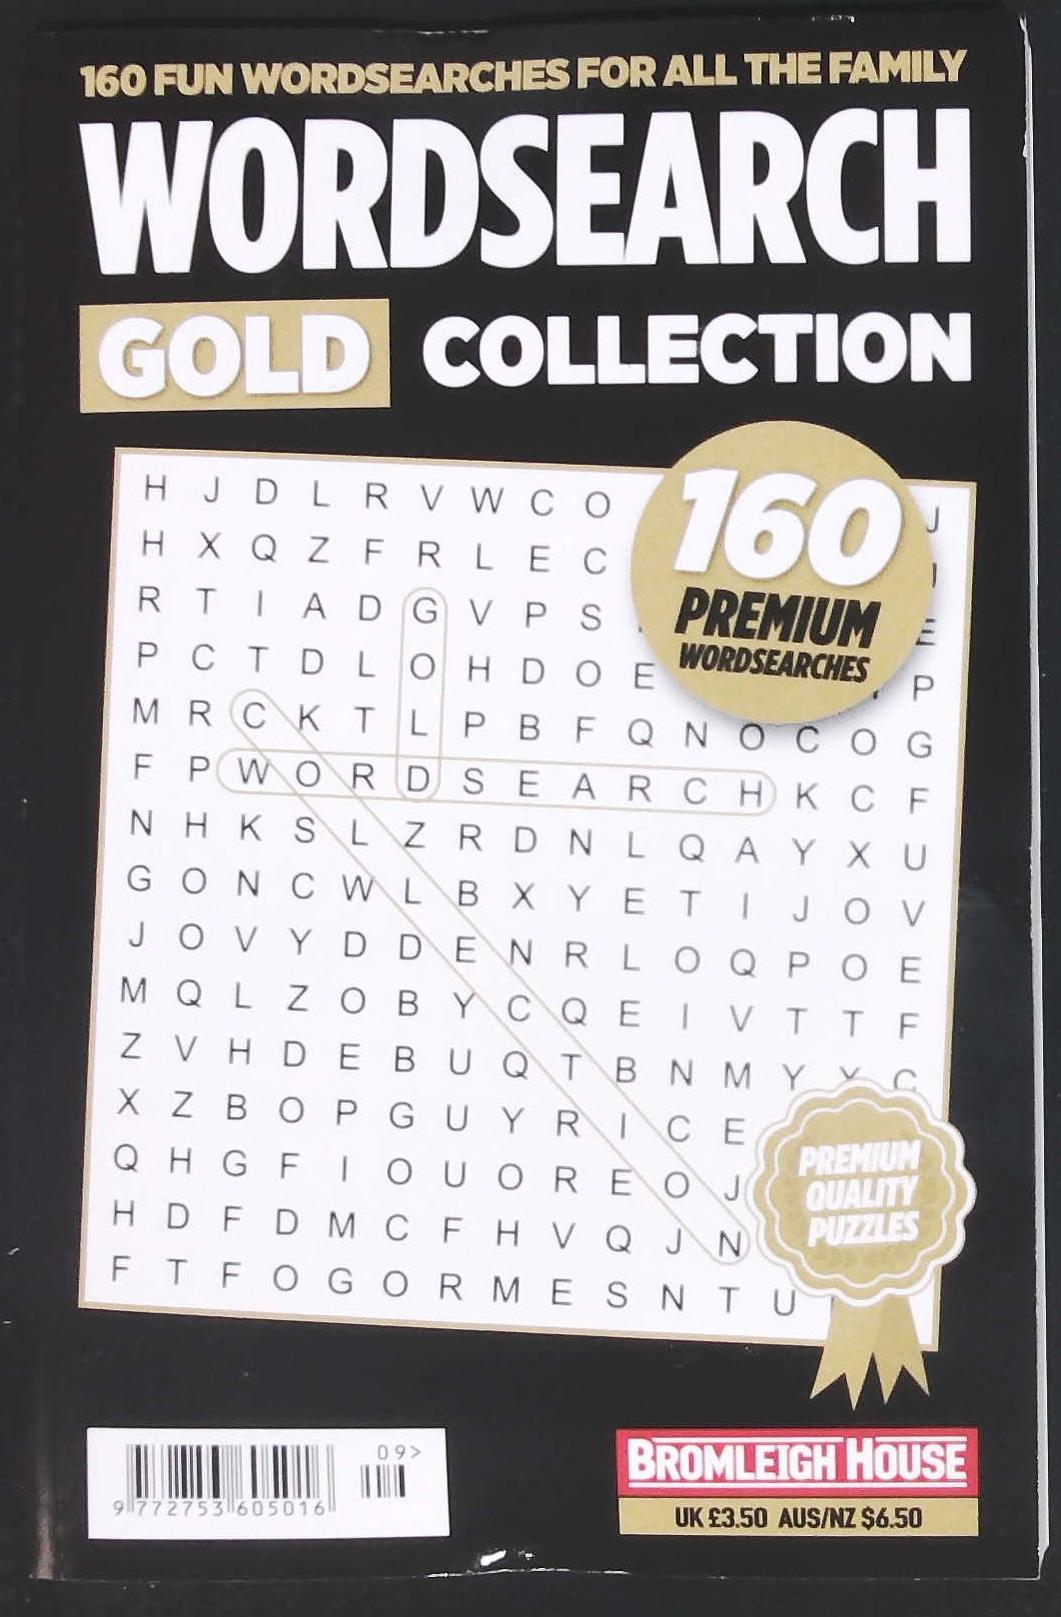 WORDSEARCH GOLD COLLECTION